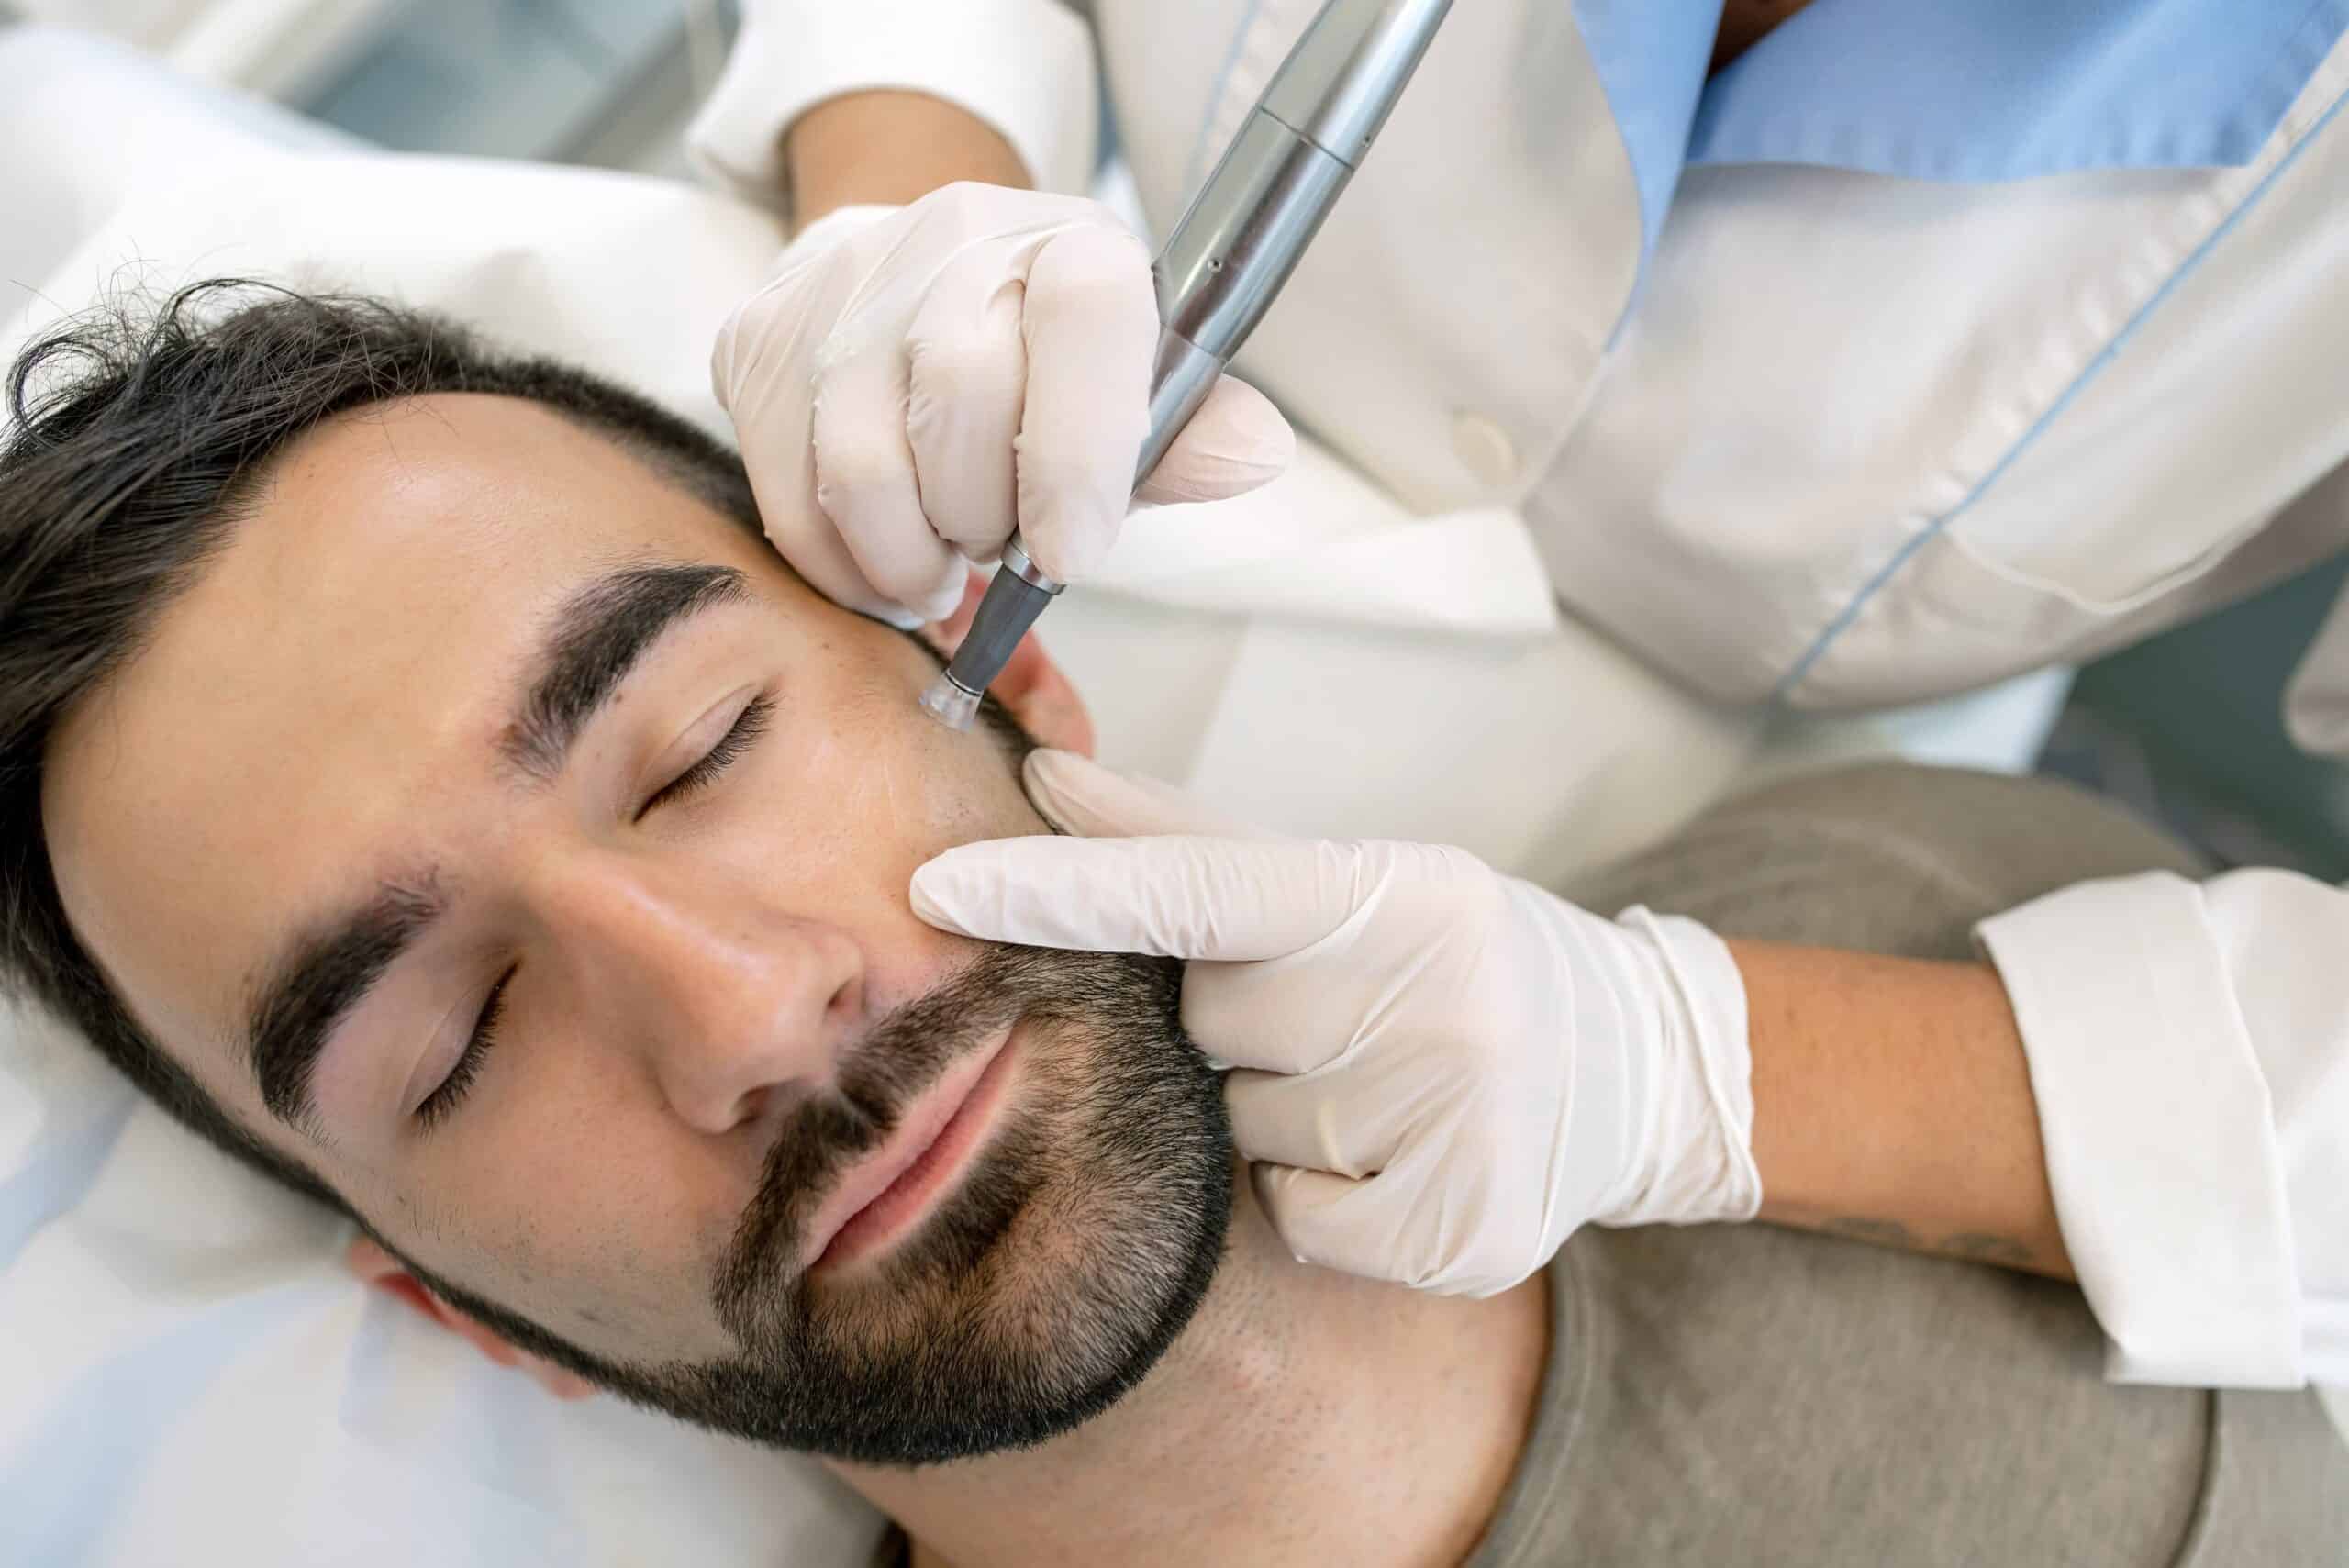 Provider using a microneedling tool on a man's face